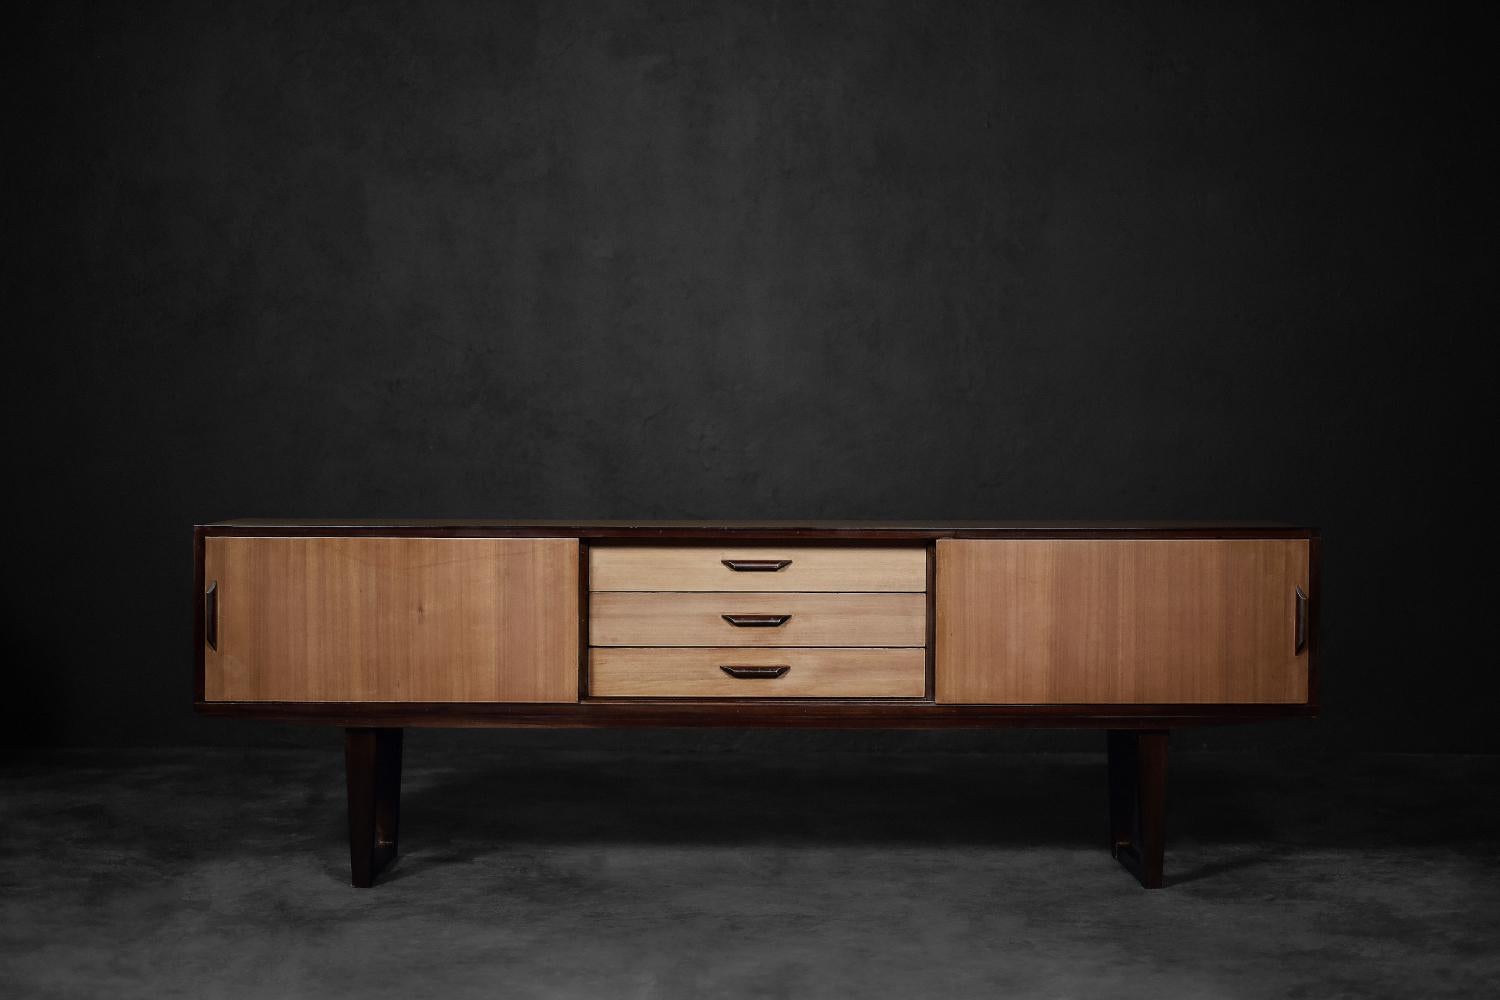 This classic sideboard was made in Denmark during the 1970s. It is made of extremely interesting and rare exotic wood. The wood grain is delicate and harmonizes with the overall aesthetics of the furniture. The sideboard has three drawers in the